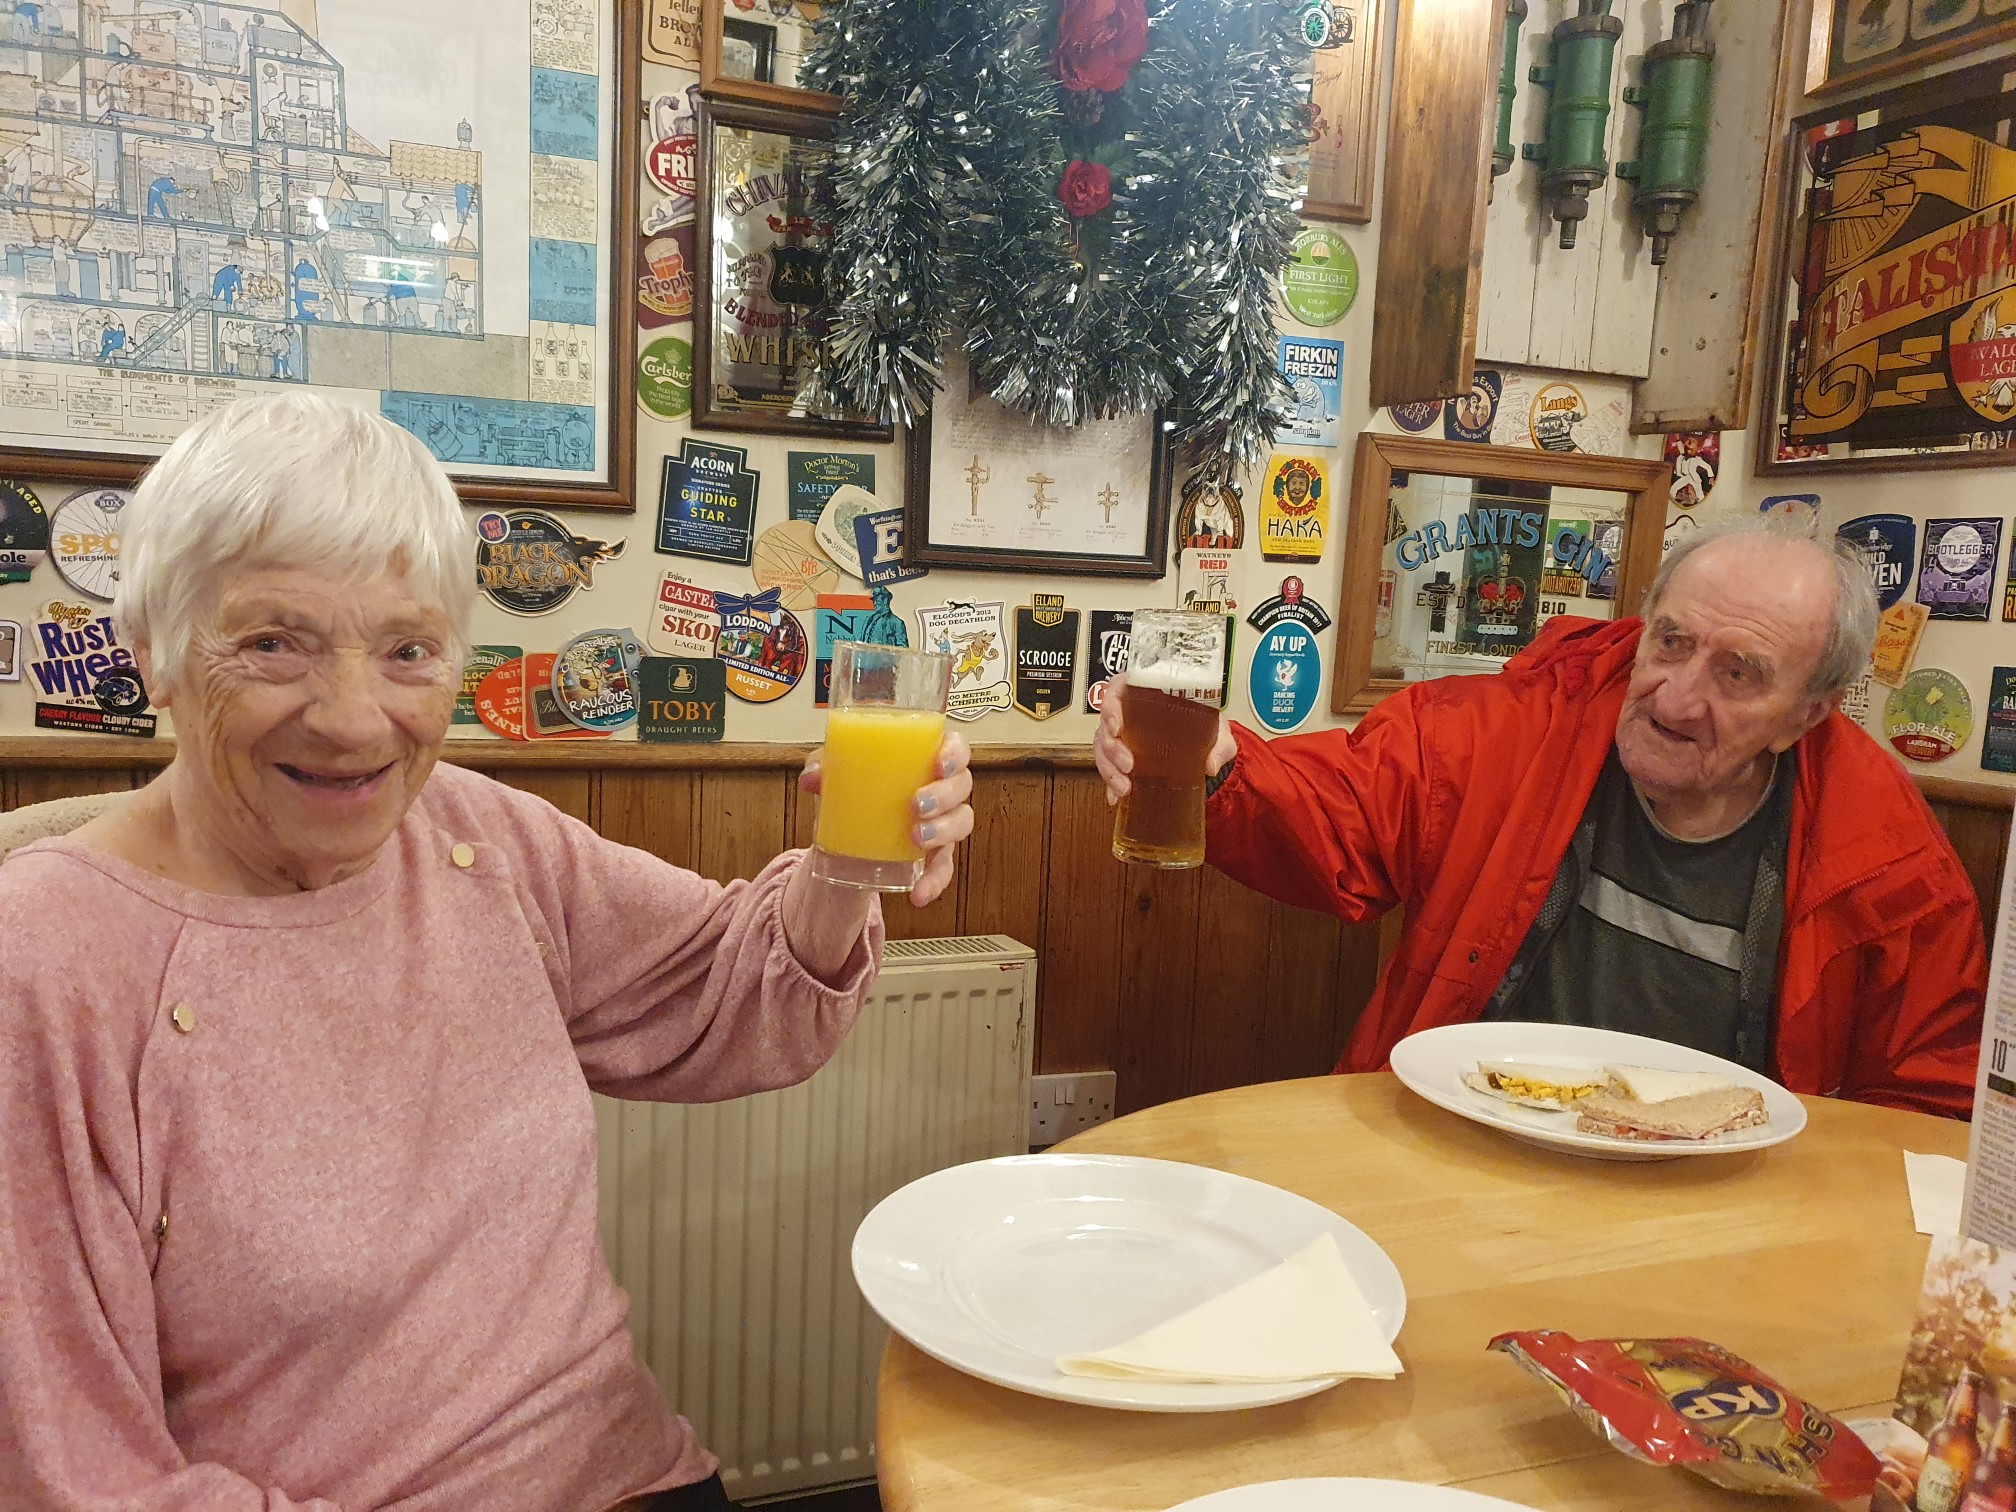 residents at the pub